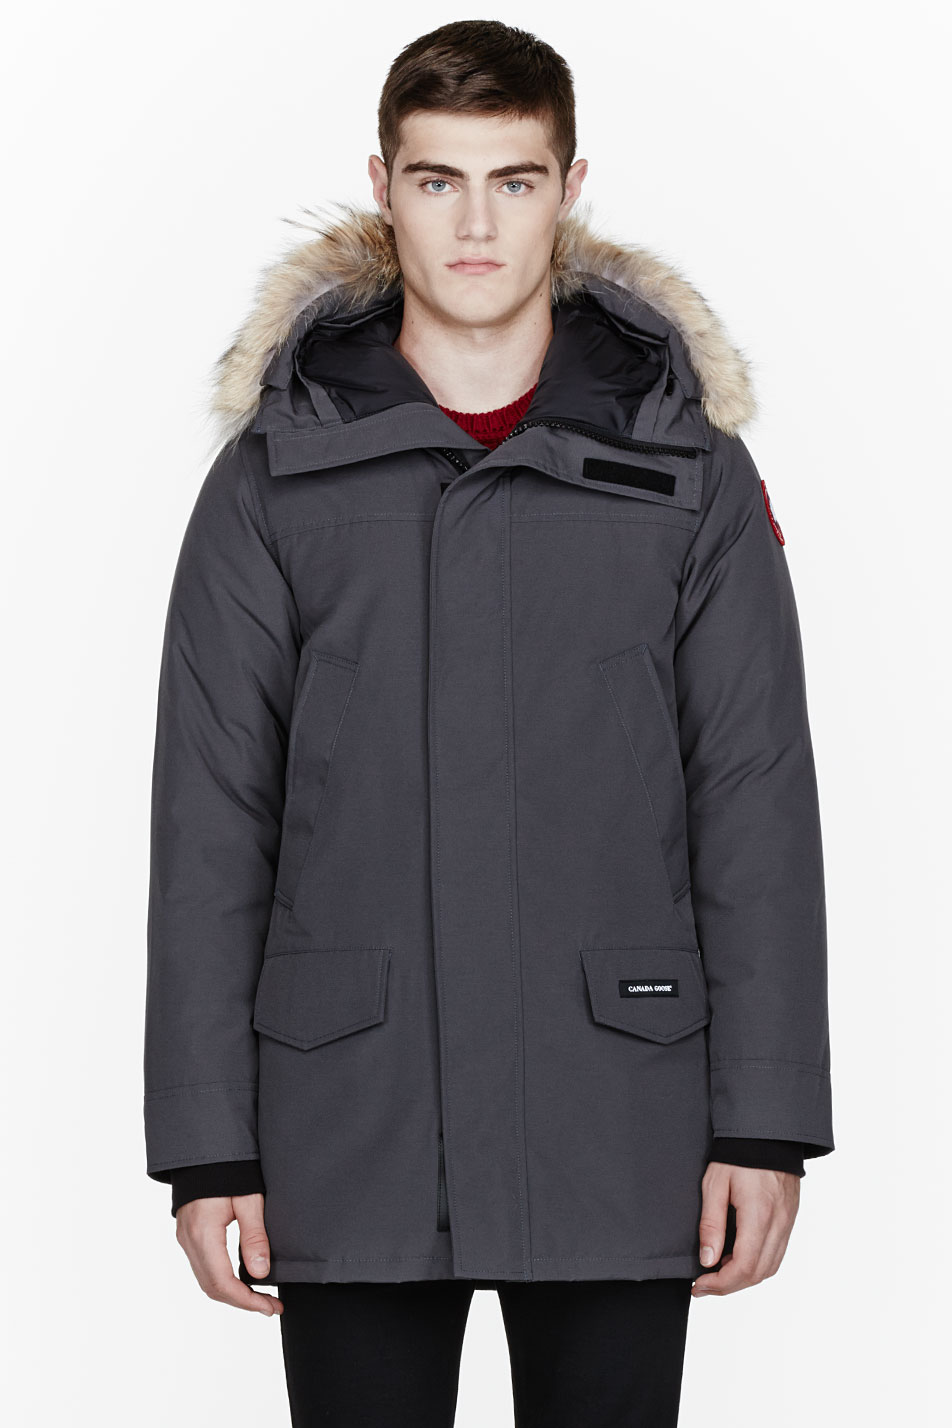 Lyst - Canada Goose Charcoal Grey Down and Fur Langford Parka in Gray ...